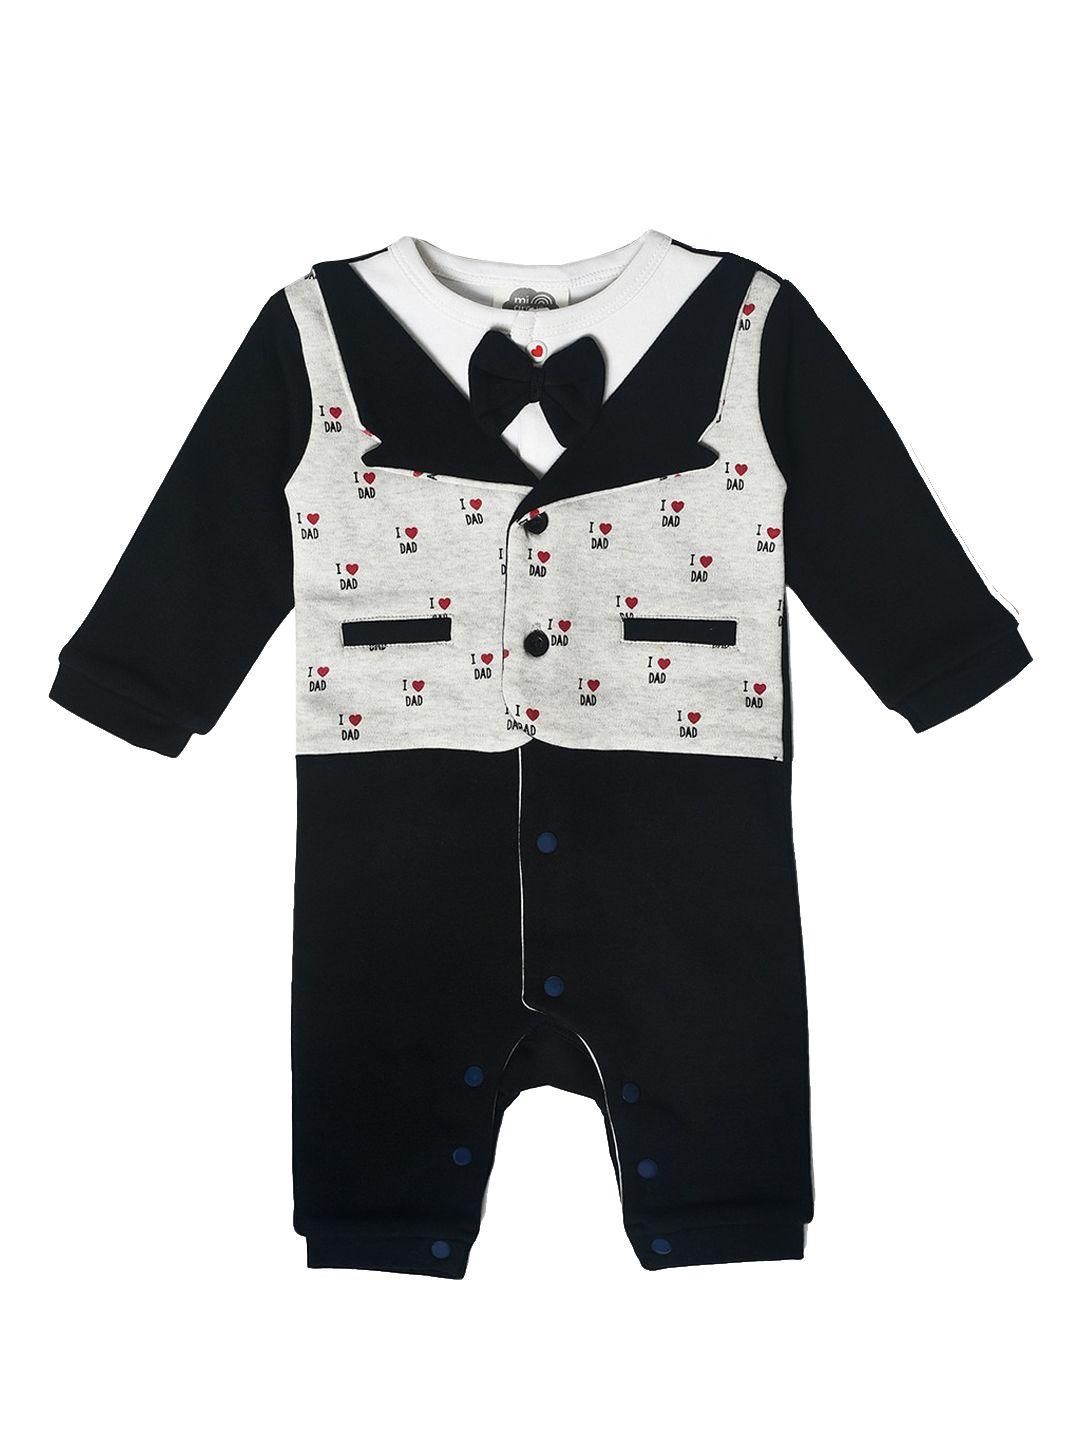 miarcus-boys-black-knitted-jacquard-overall-rompers